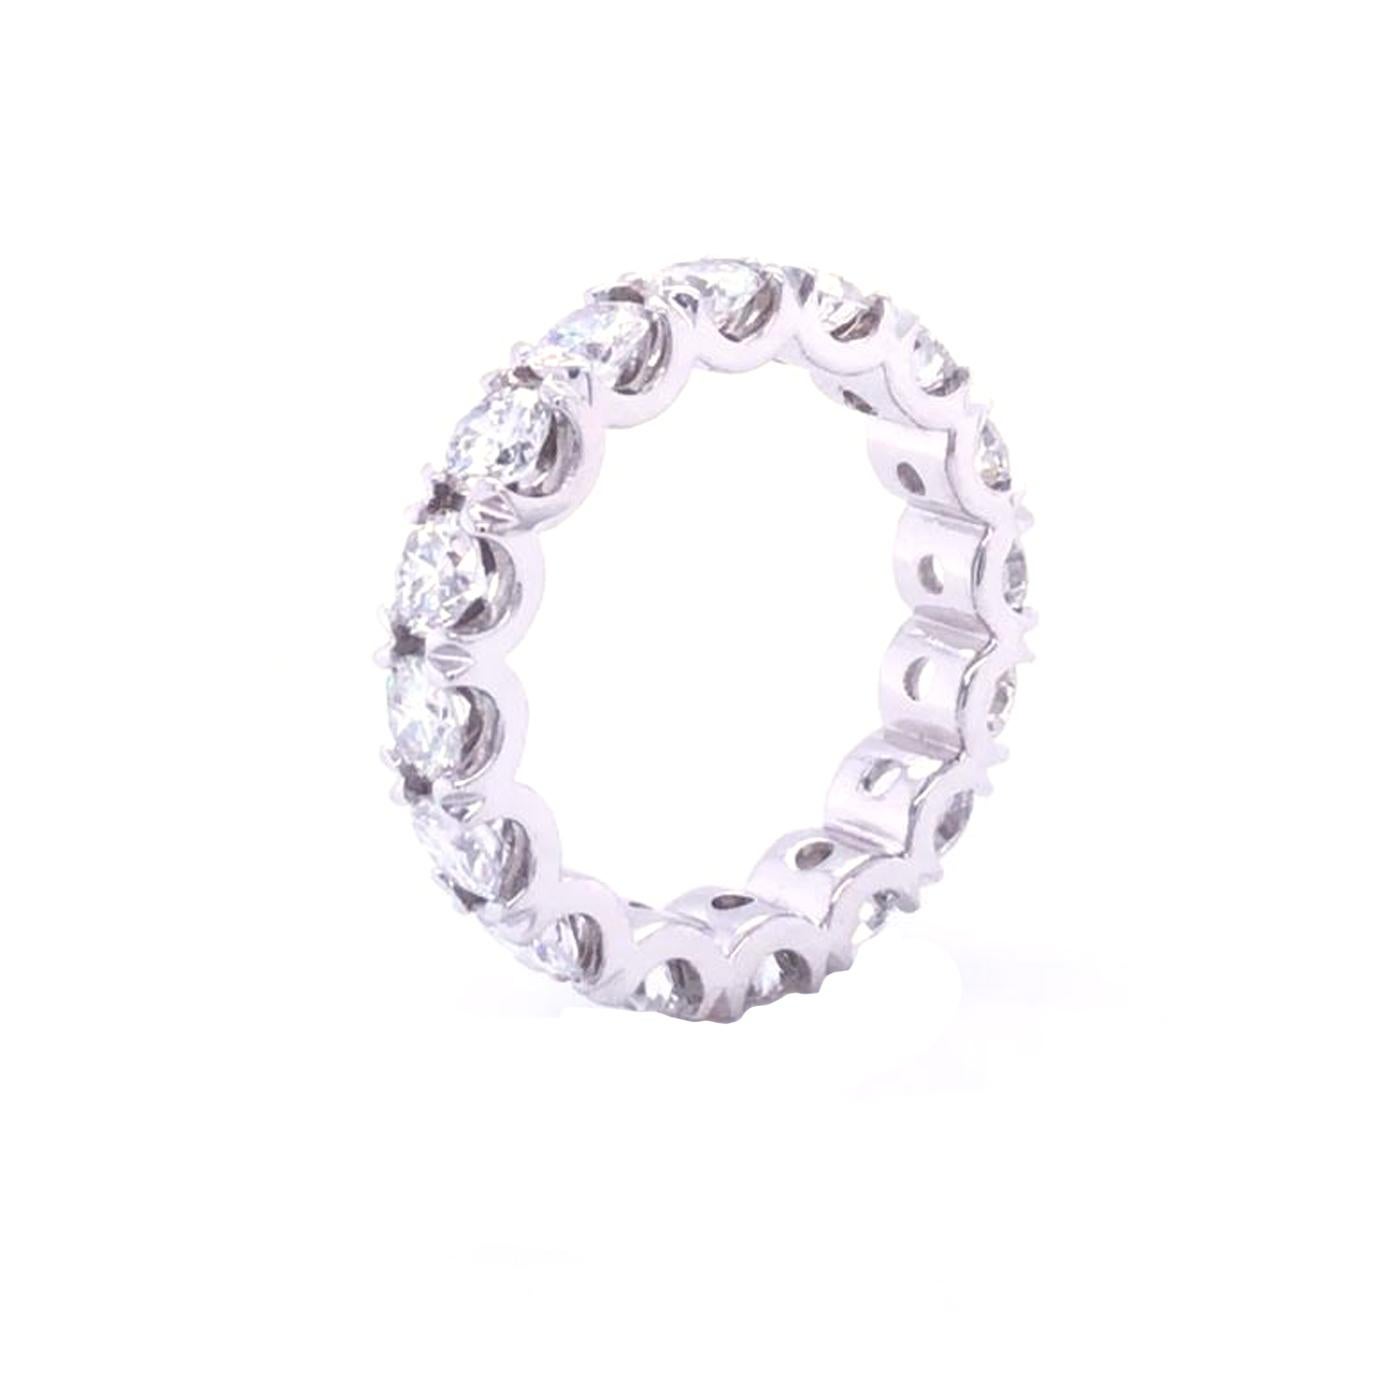 As longstanding symbols of eternal love, eternity bands make a stunning compliment to an engagement ring, anniversary present, and special occasion gift. This u-shape style band is available in 18k White Gold. Platinum Diamond Eternity band,